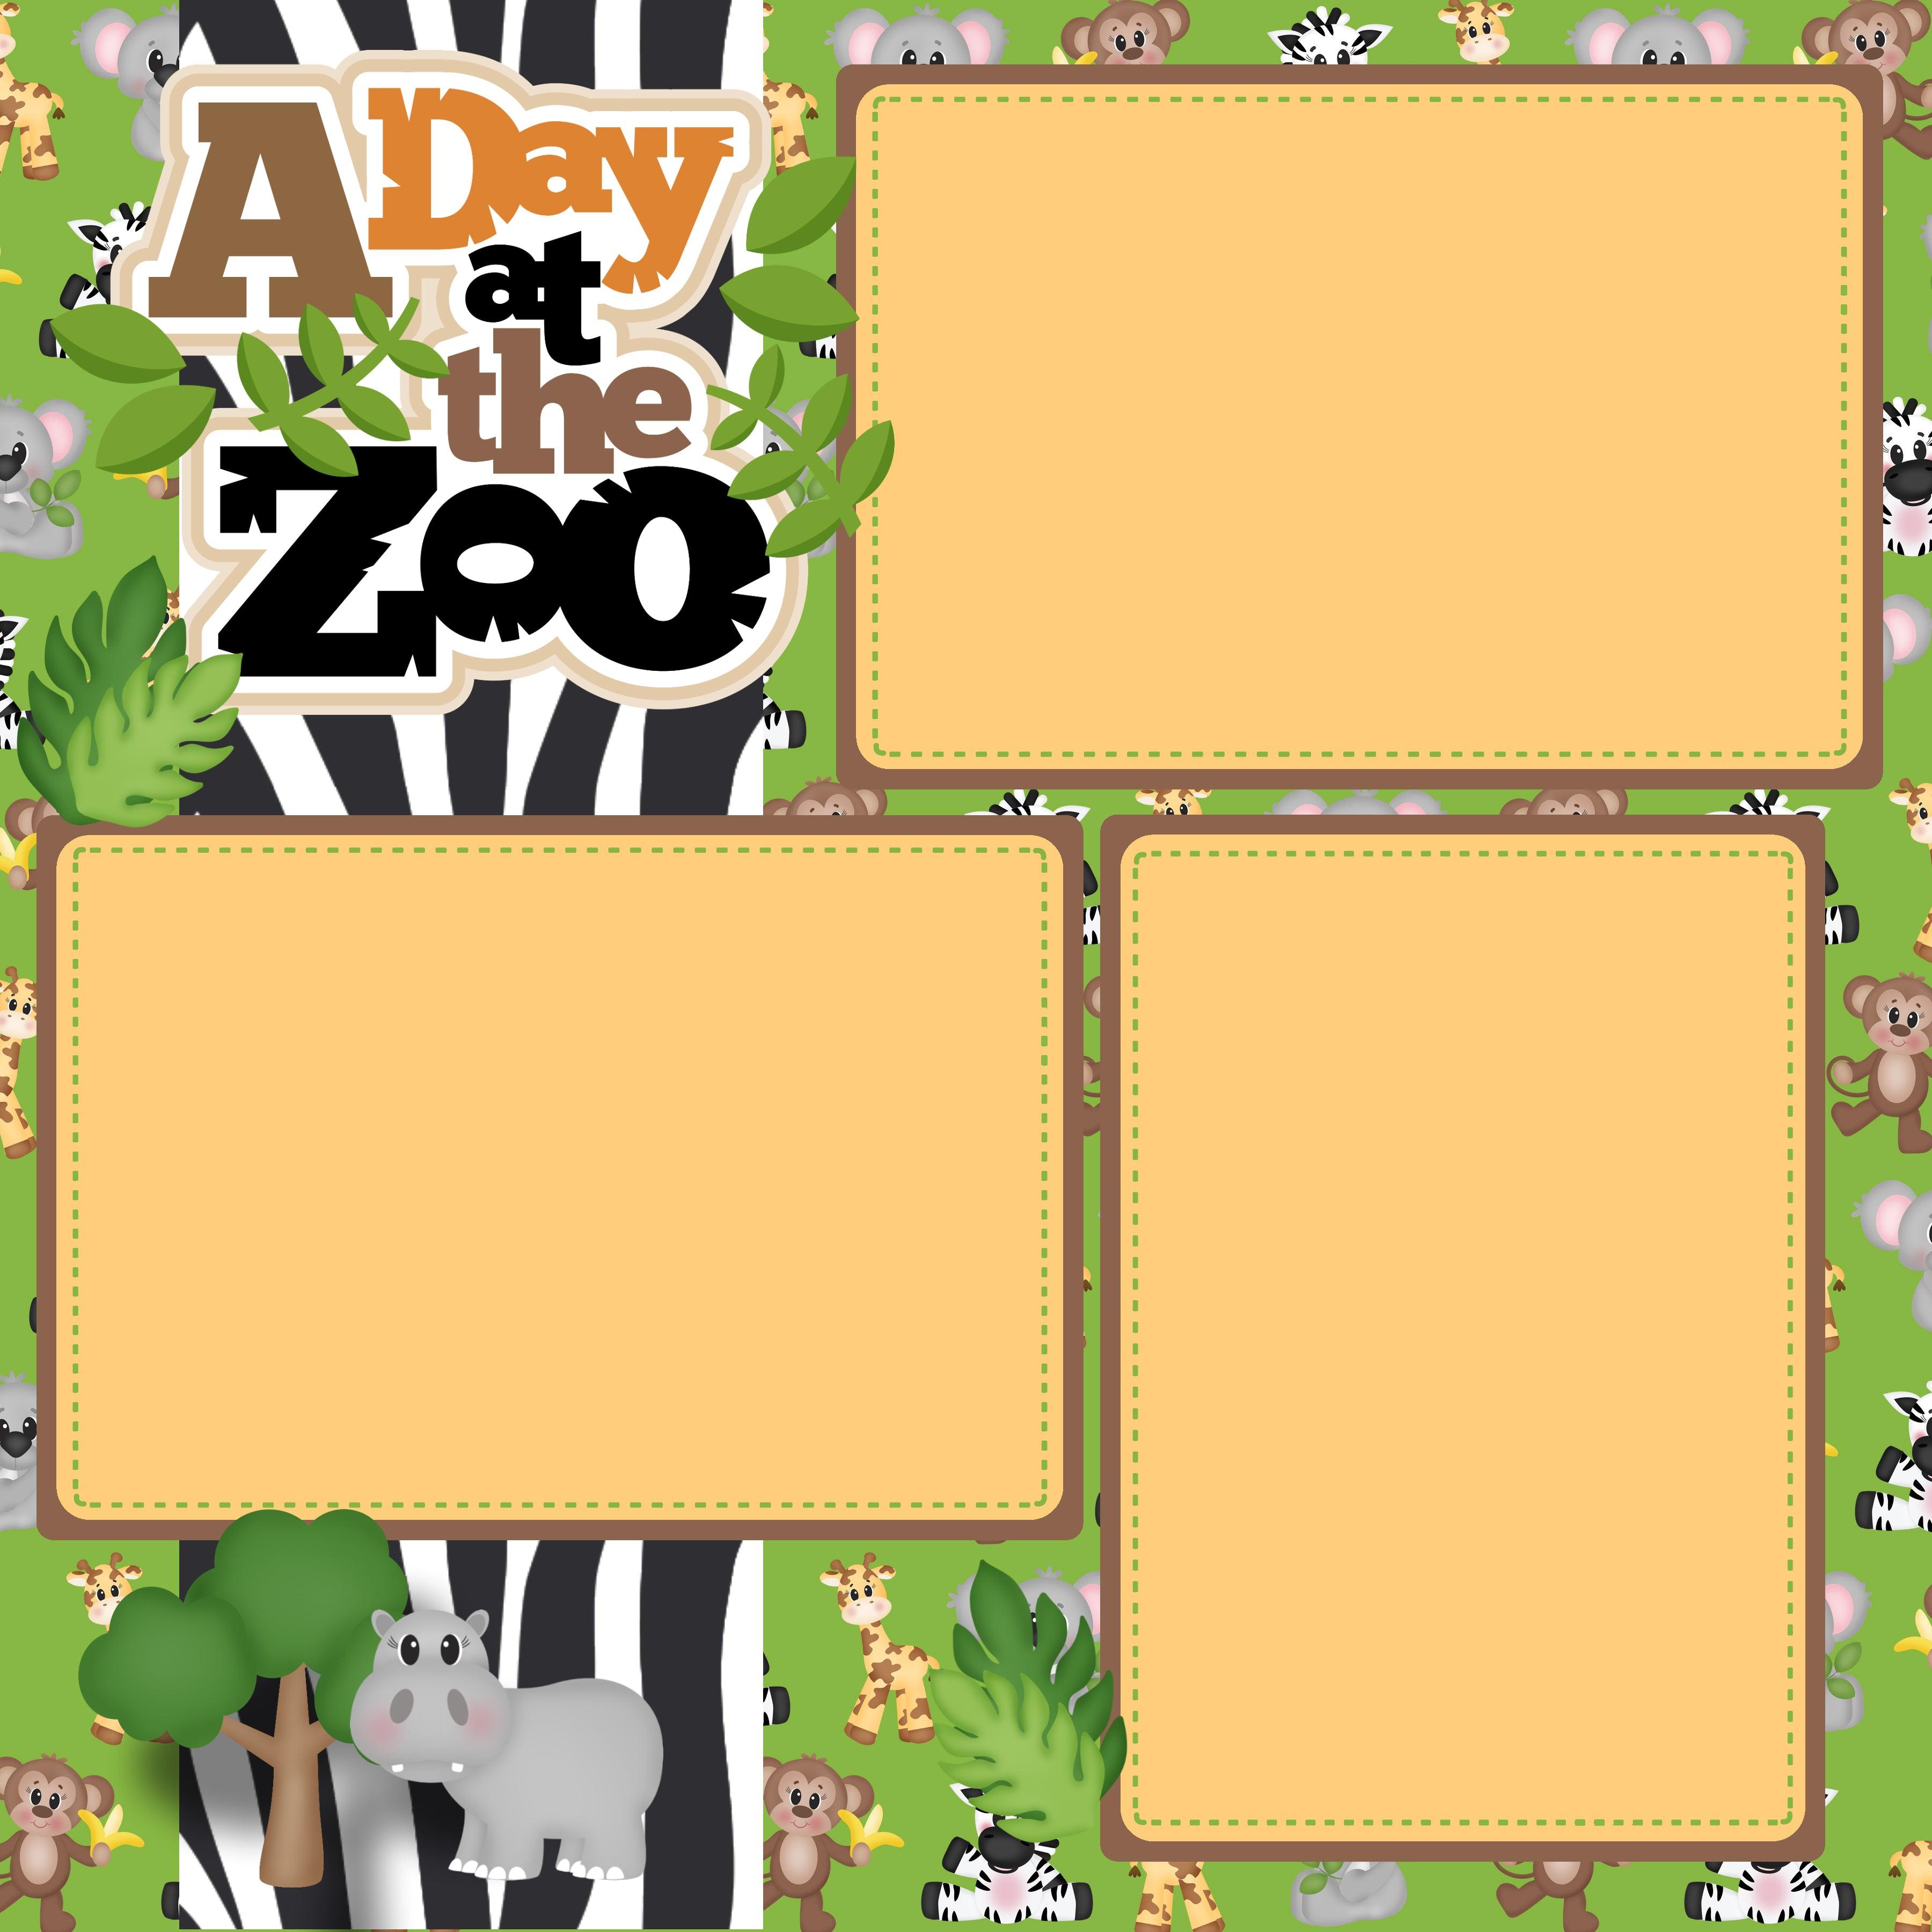 A Day At The Zoo (2) - 12 x 12 Premade, Printed Scrapbook Pages by SSC Designs - Scrapbook Supply Companies